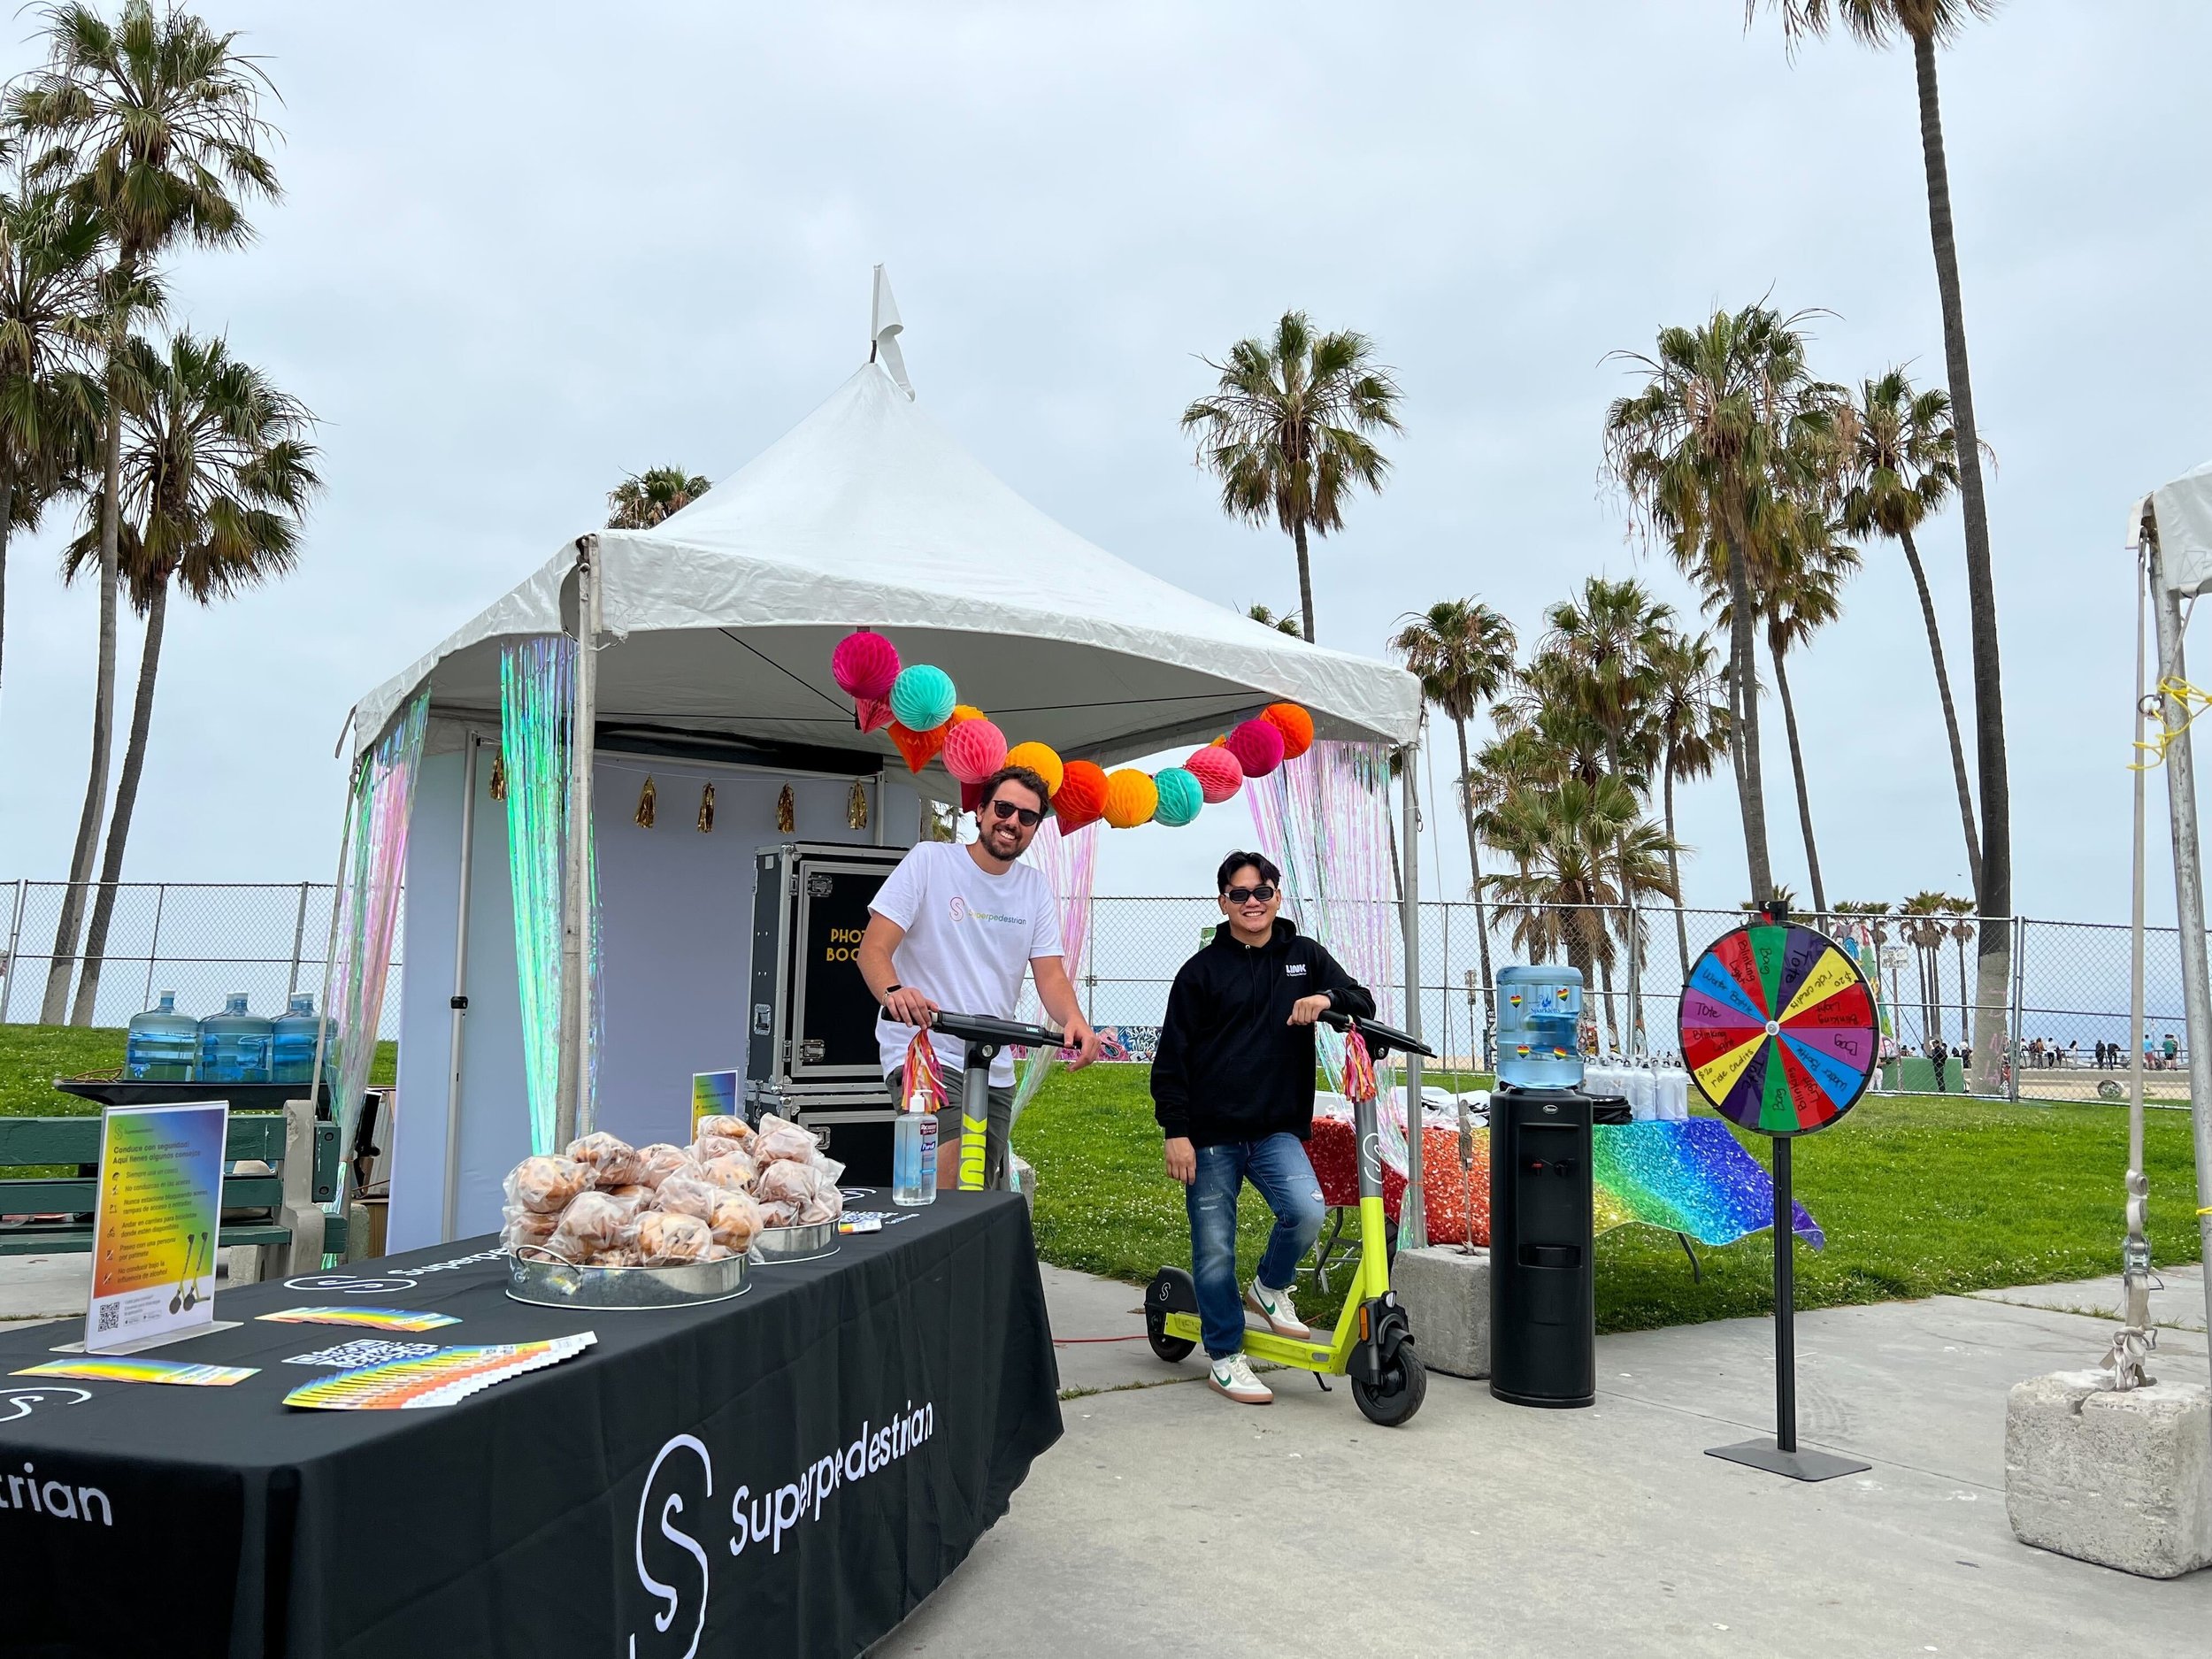 Celebrating at Venice Pride with giveaways, snacks, and rides